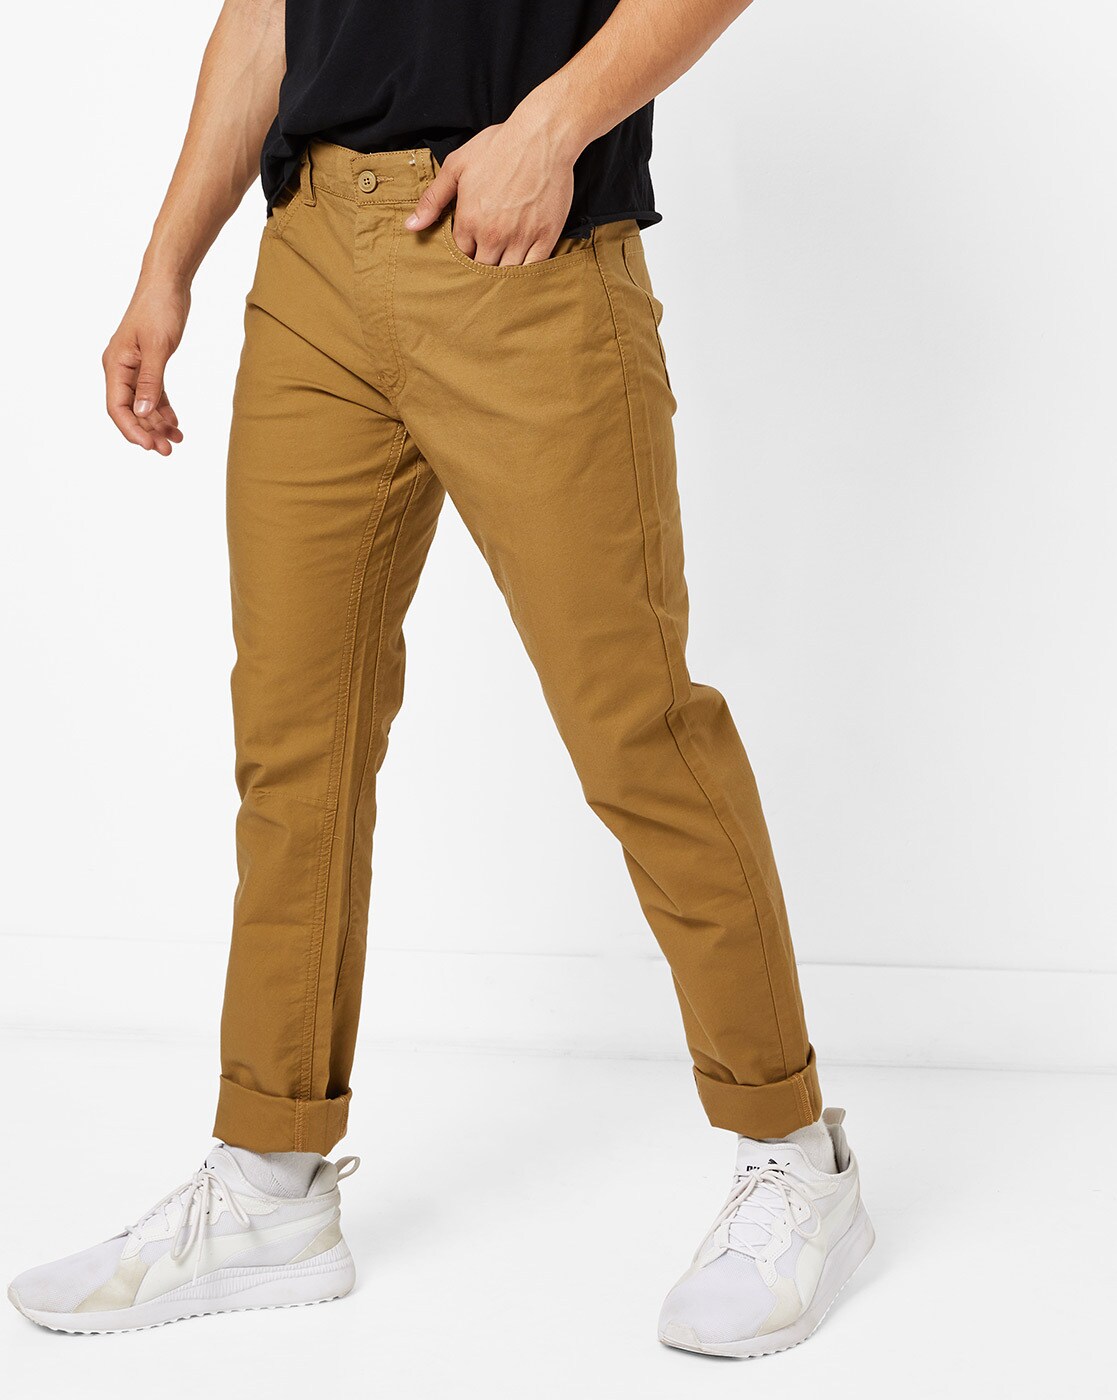 Levis Casual Trousers  Buy Levis Men Khaki 502 Tapered Trousers  OnlineNykaa Fashion